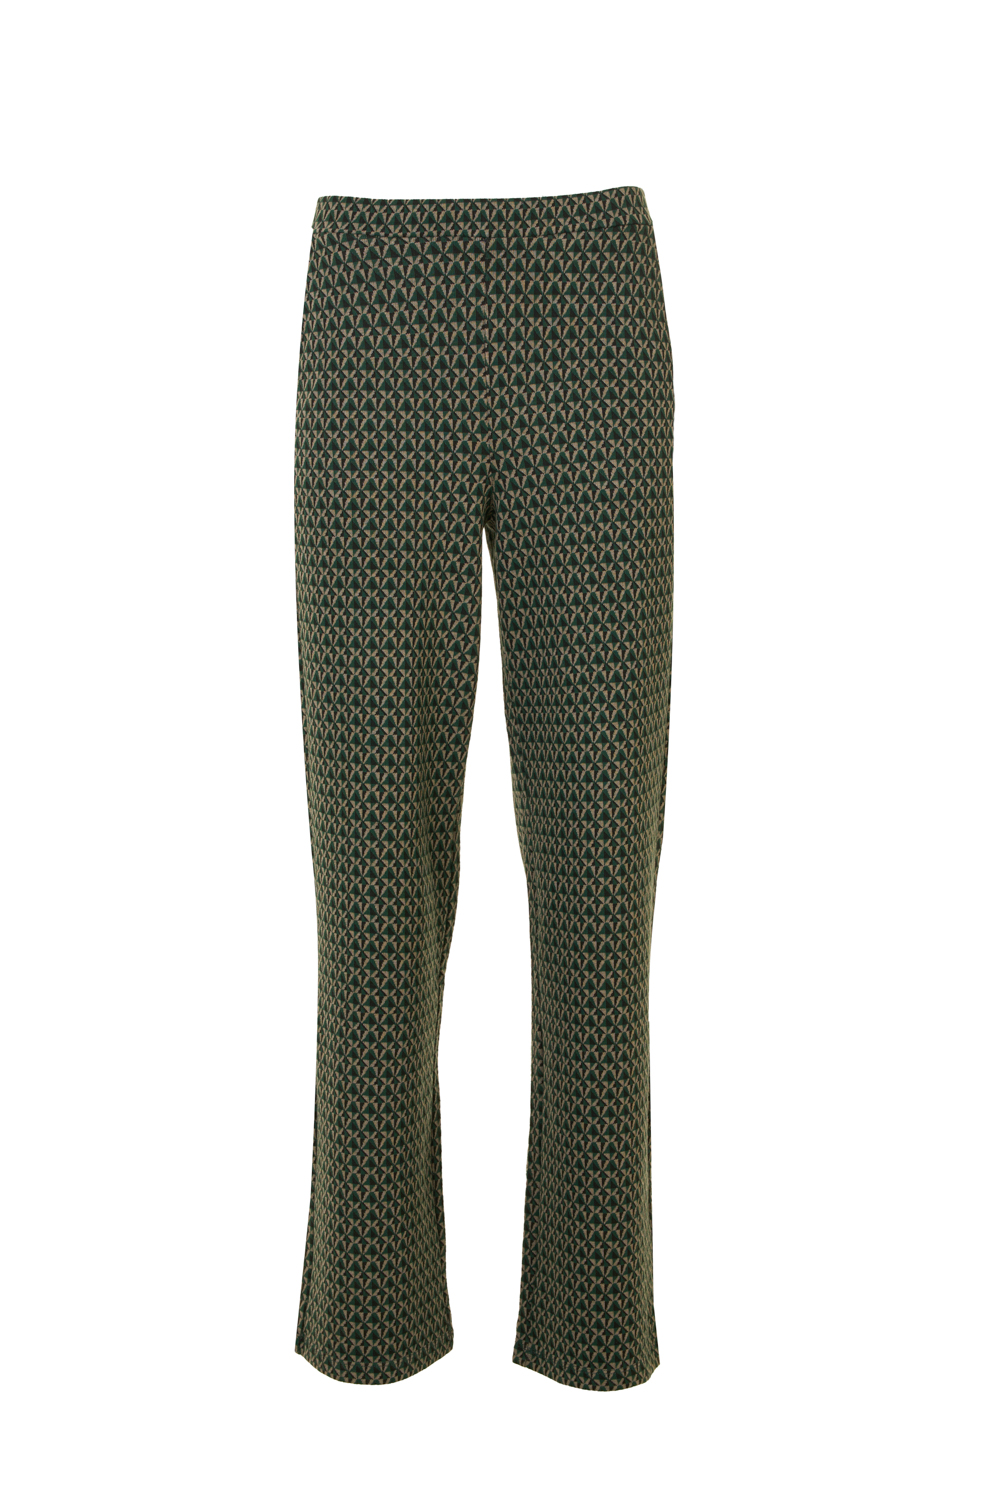 Straight Jersey Patterned Trousers with Elasticated Waistband and Side Pockets (Mexx)